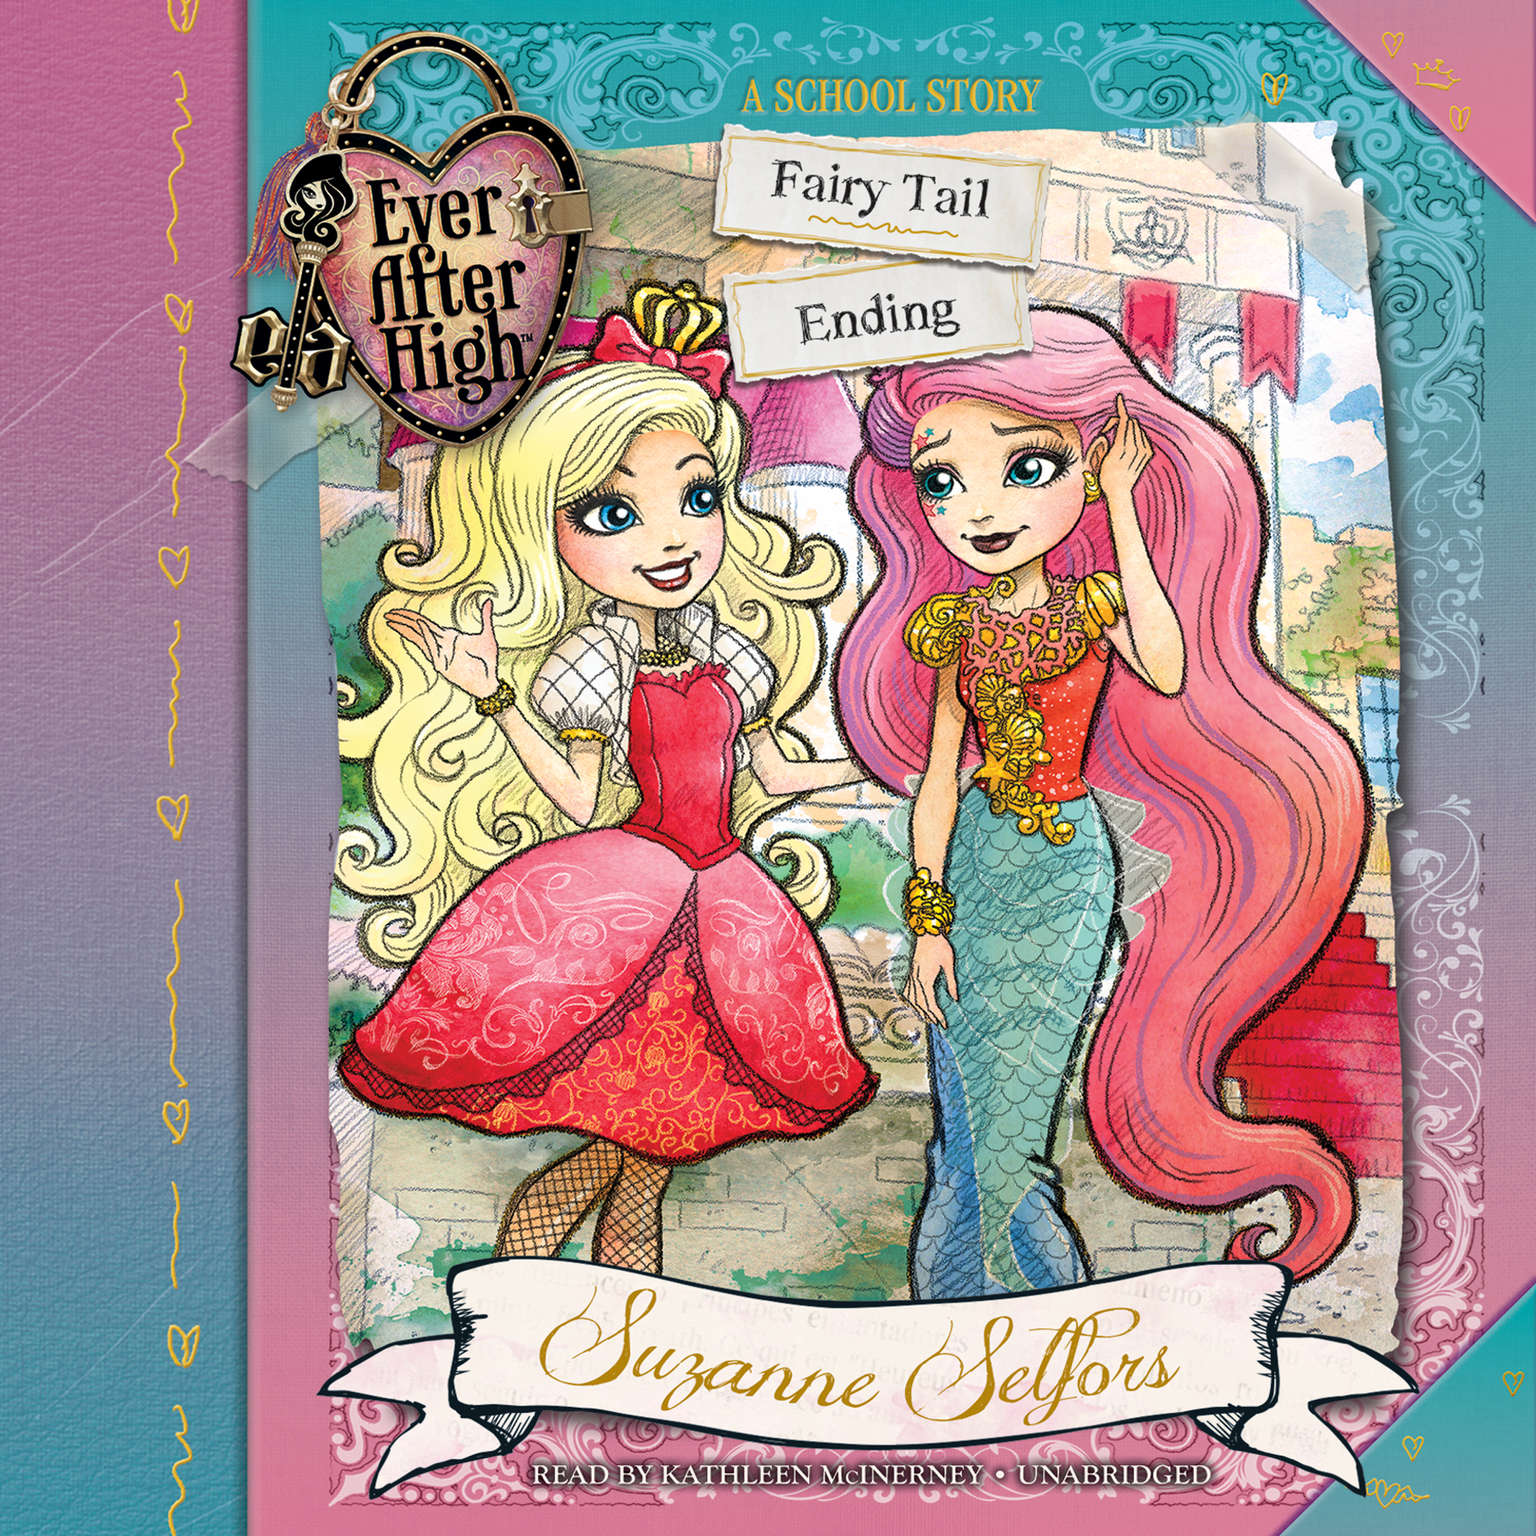 Ever After High: Fairy Tail Ending Audiobook, by Suzanne Selfors